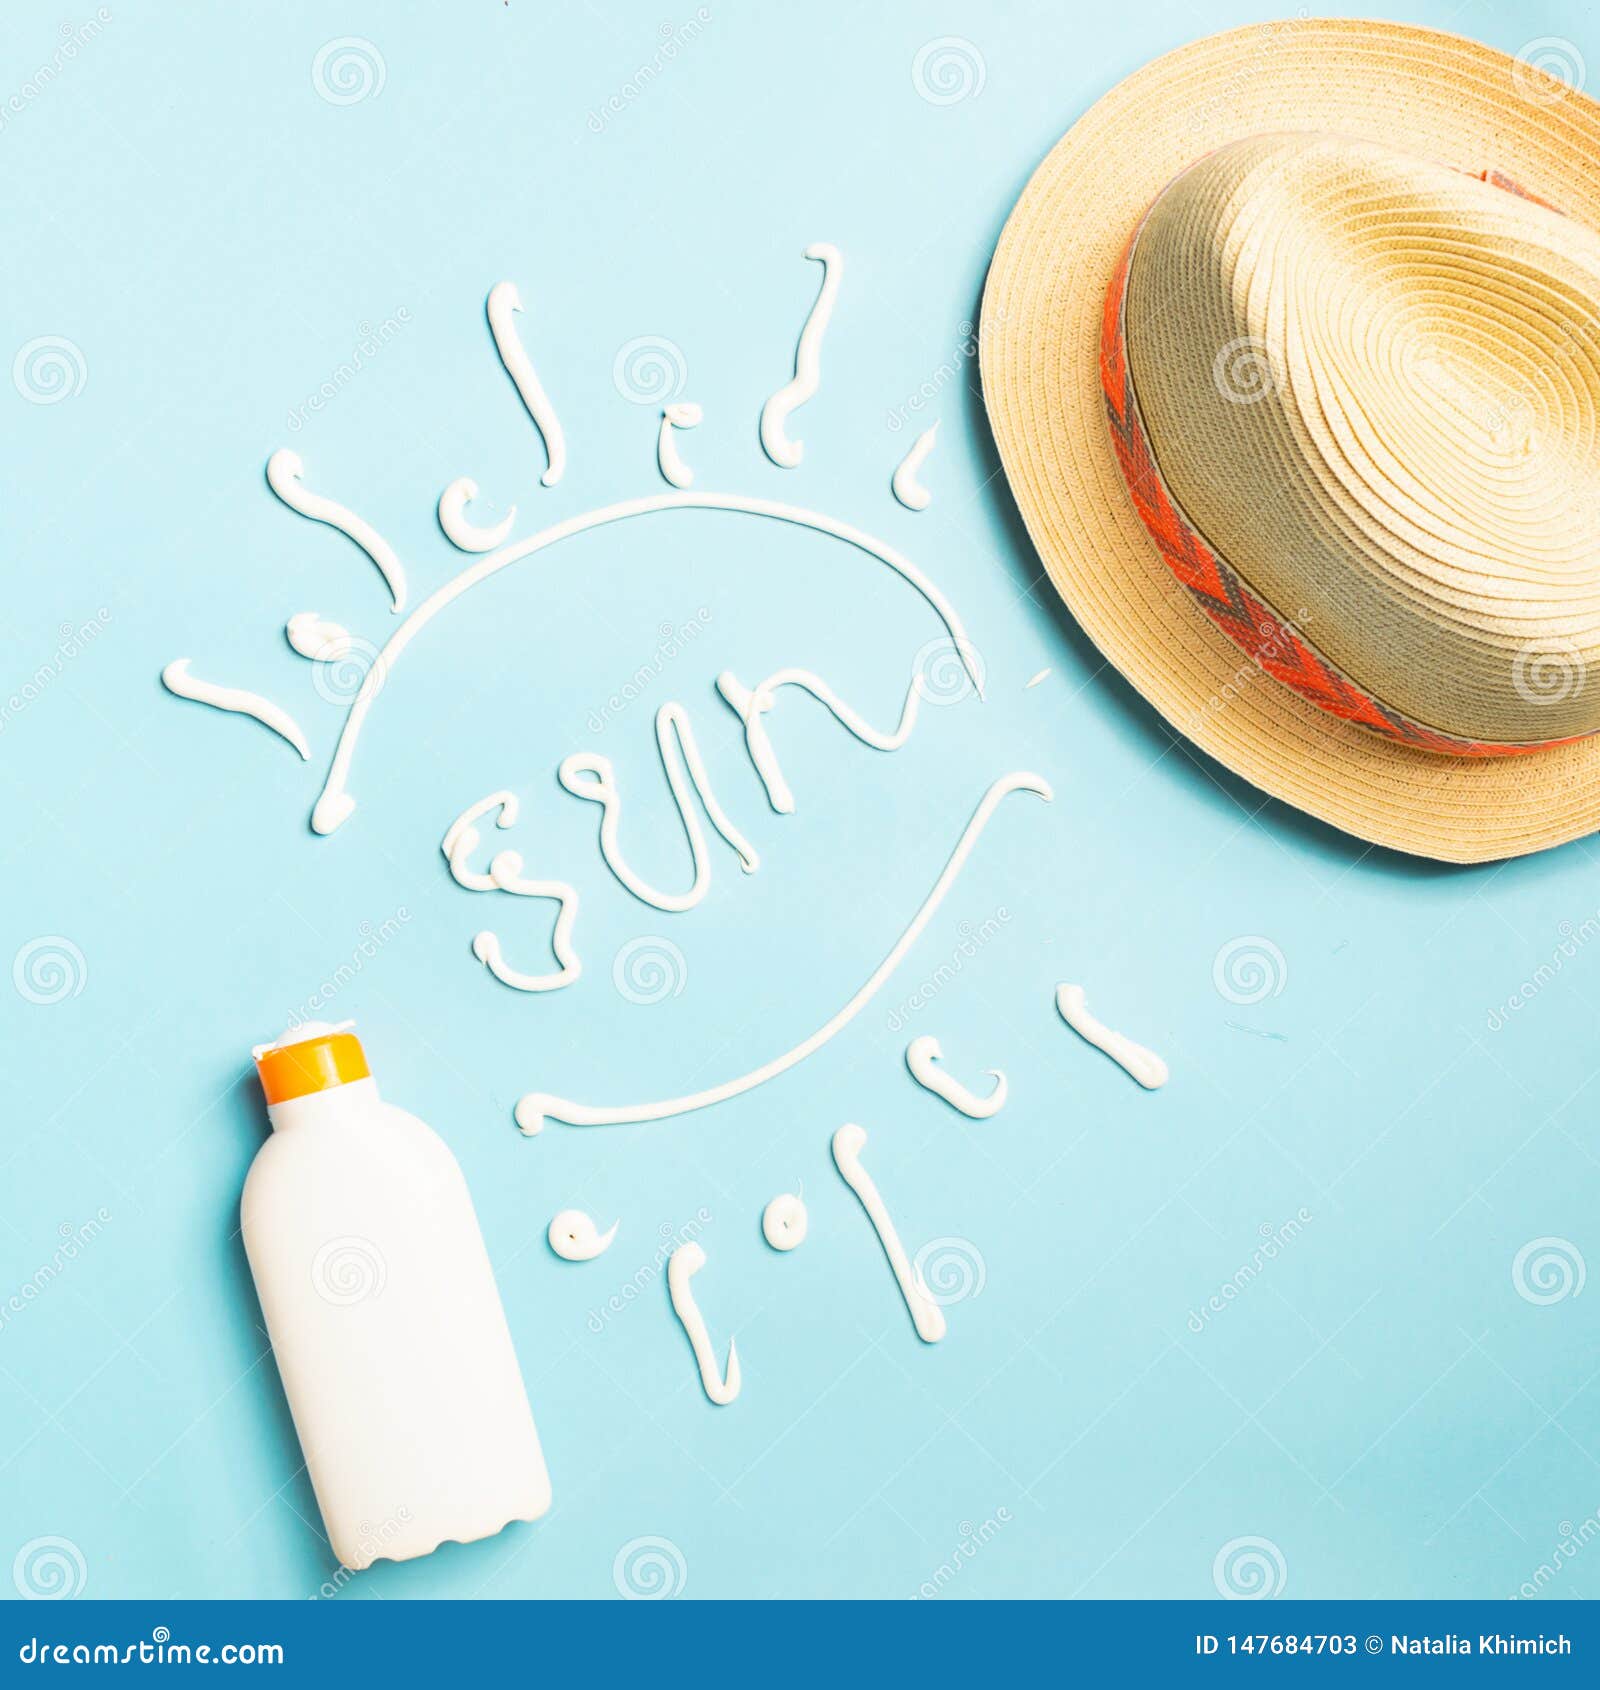 Summer Beach Accessories Sunscreen Hat Bright Blue Background Text SUN. the  Concept of Relaxation and the Beach Stock Image - Image of straw, colorful:  147684703